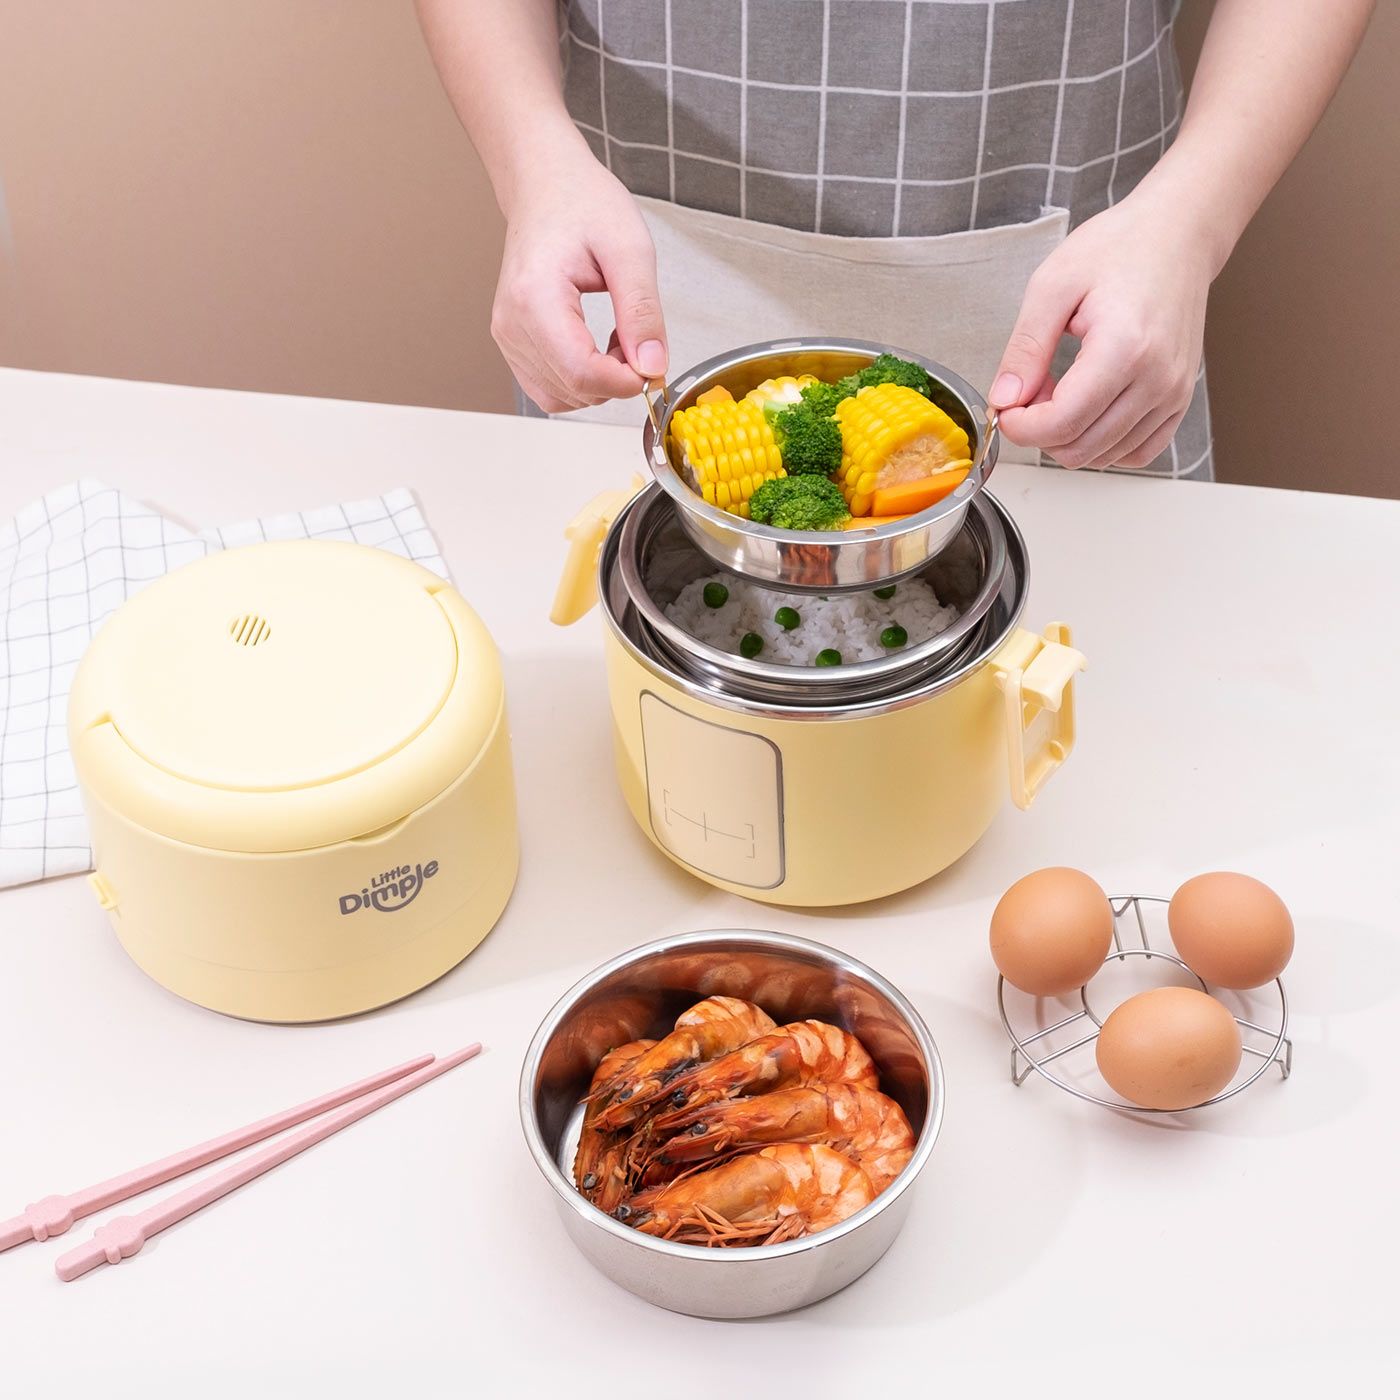 Little Dimple Portable Cooker Yellow - 2